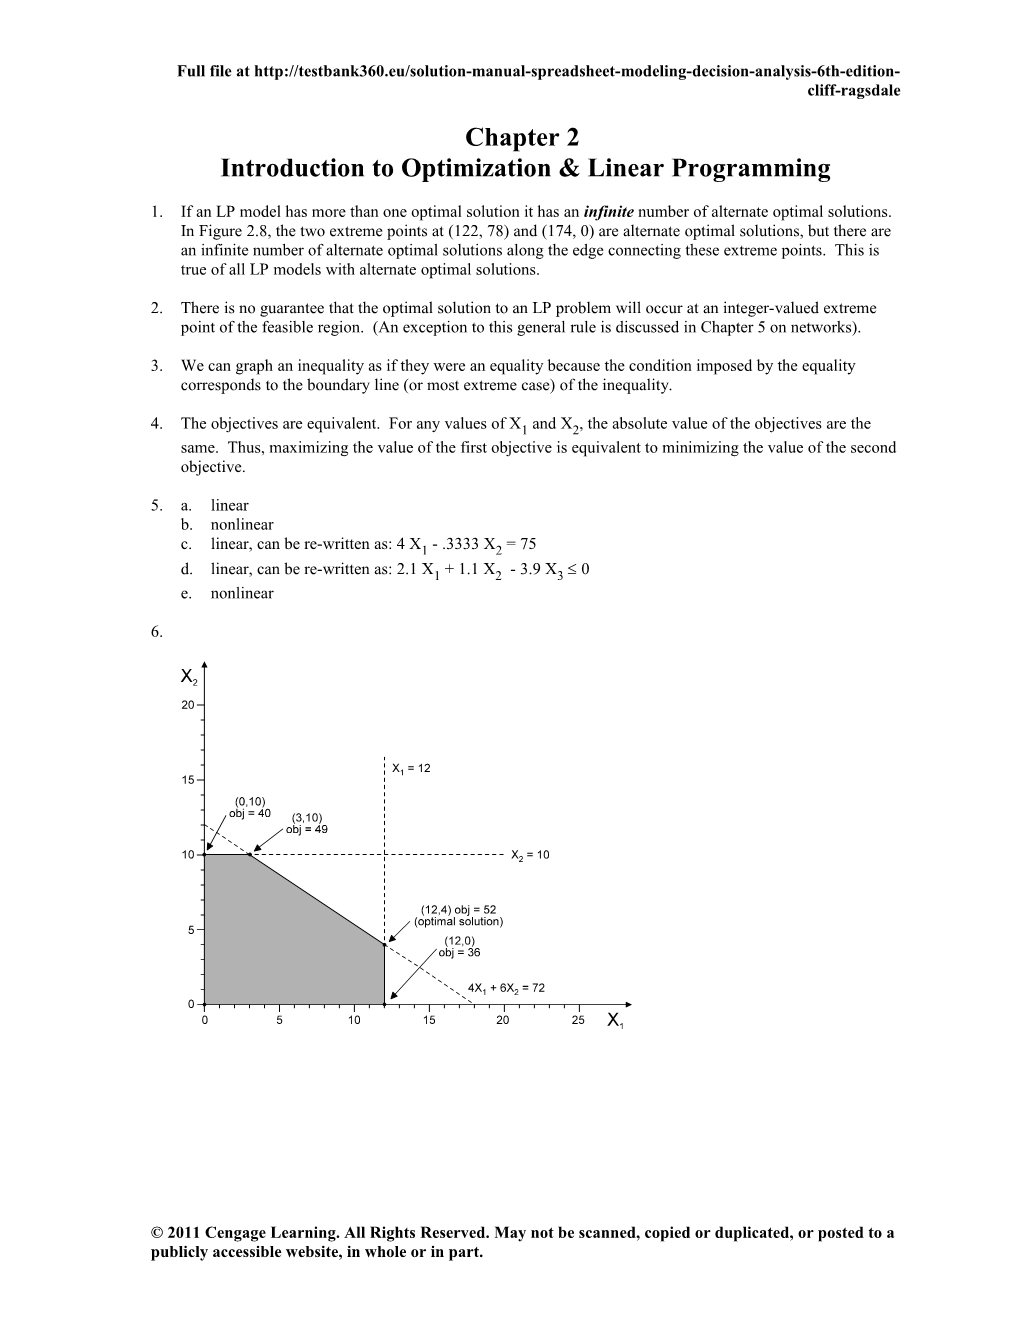 Introduction to Optimization & Linear Programming